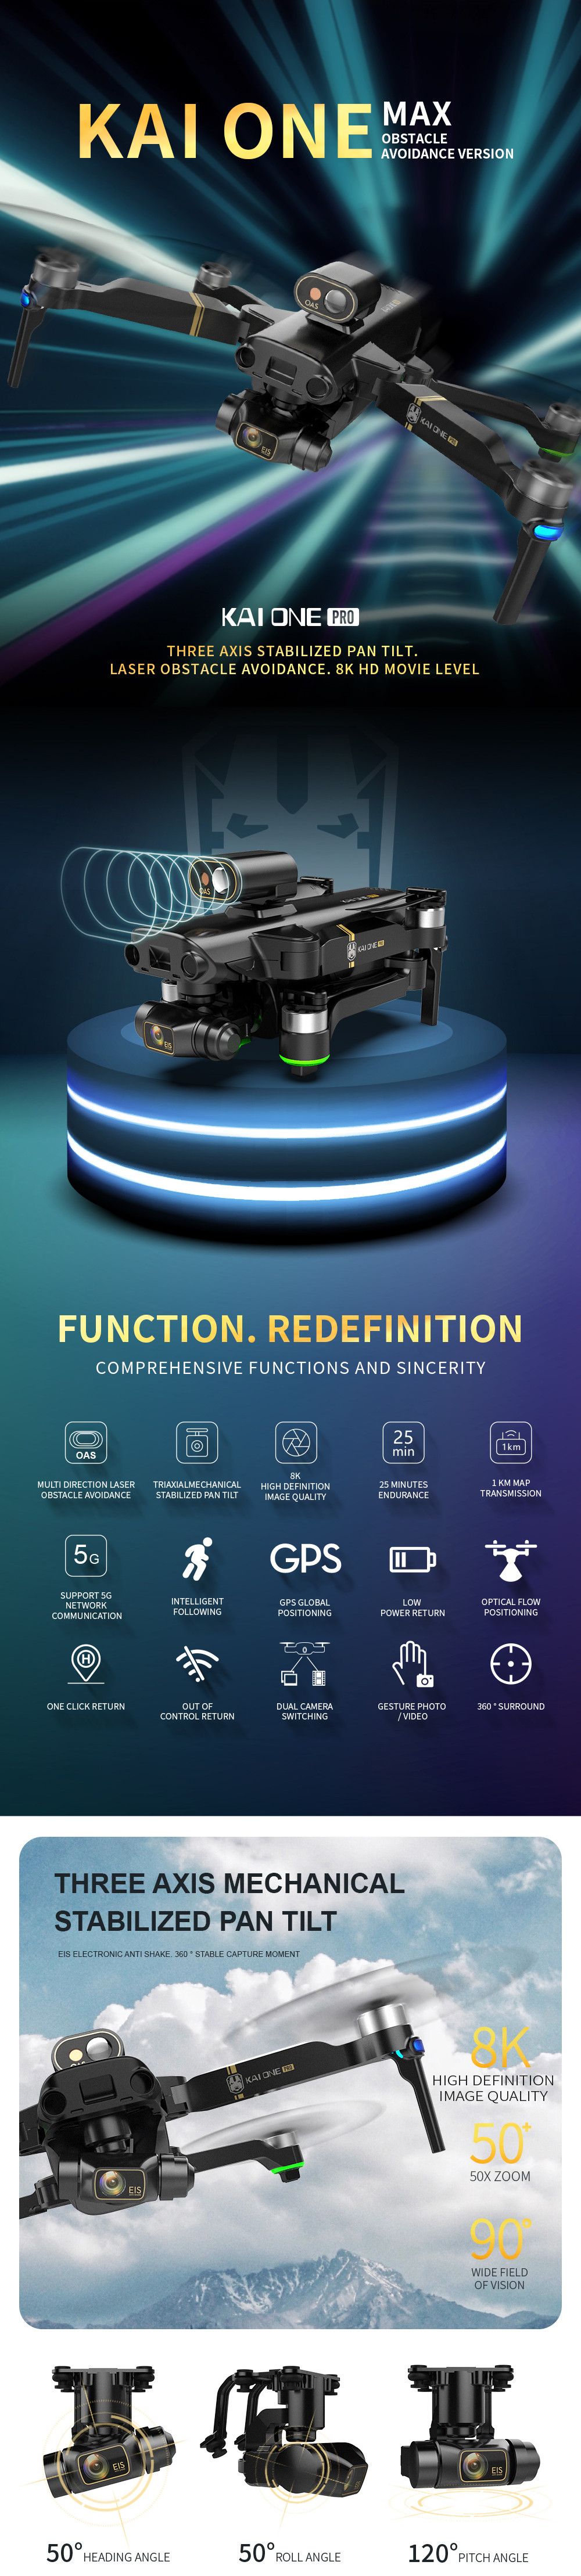 KAIONE-ProMax-5G-Wifi-1KM-FPV-With-3-axis-Gimbal-8K-Camera-Obstacle-Avoidance-GPS-EIS-Brushless-RC-D-1827415-1